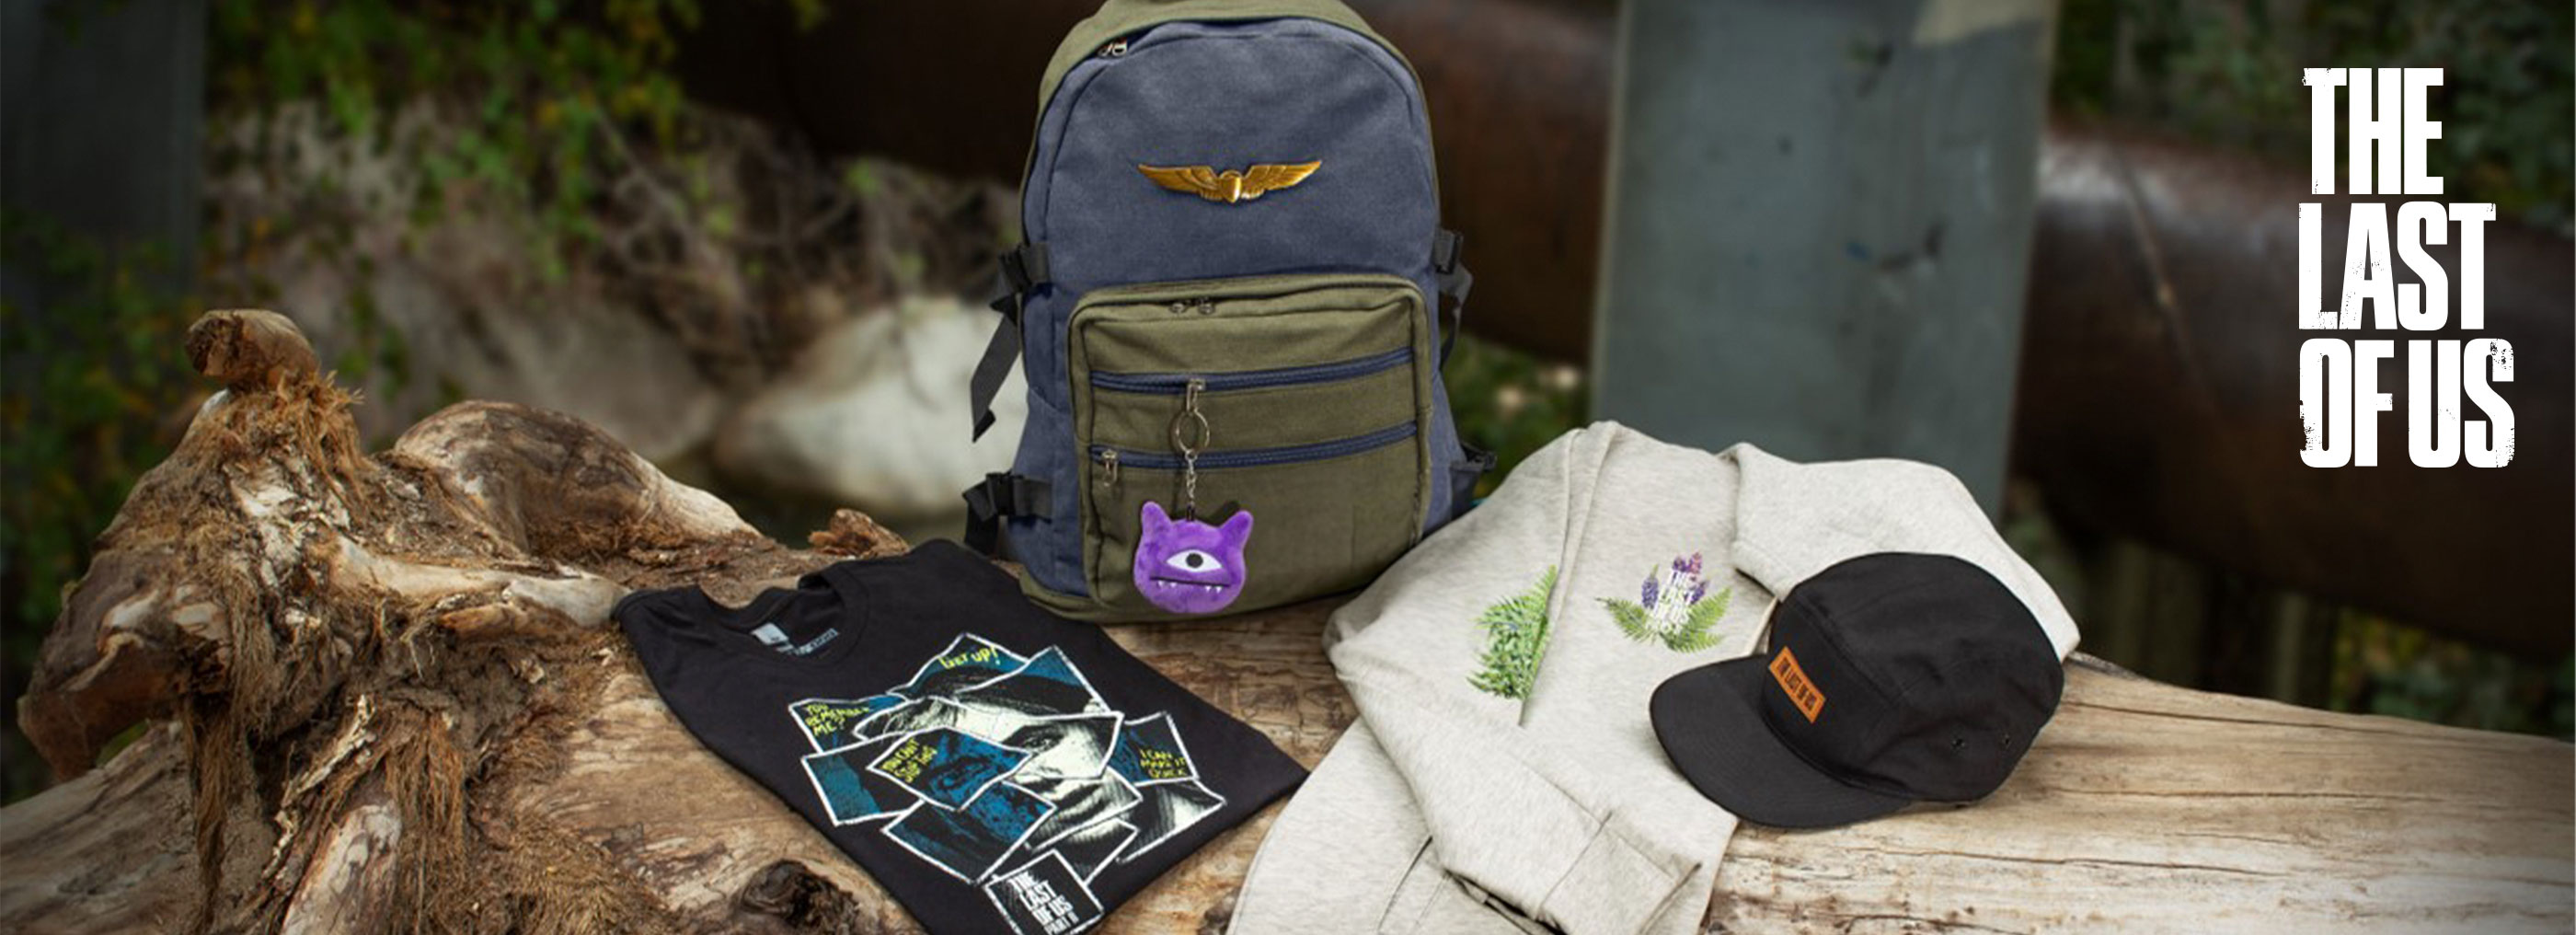 Celebrate 10 Years of The Last of Us with New Merch!